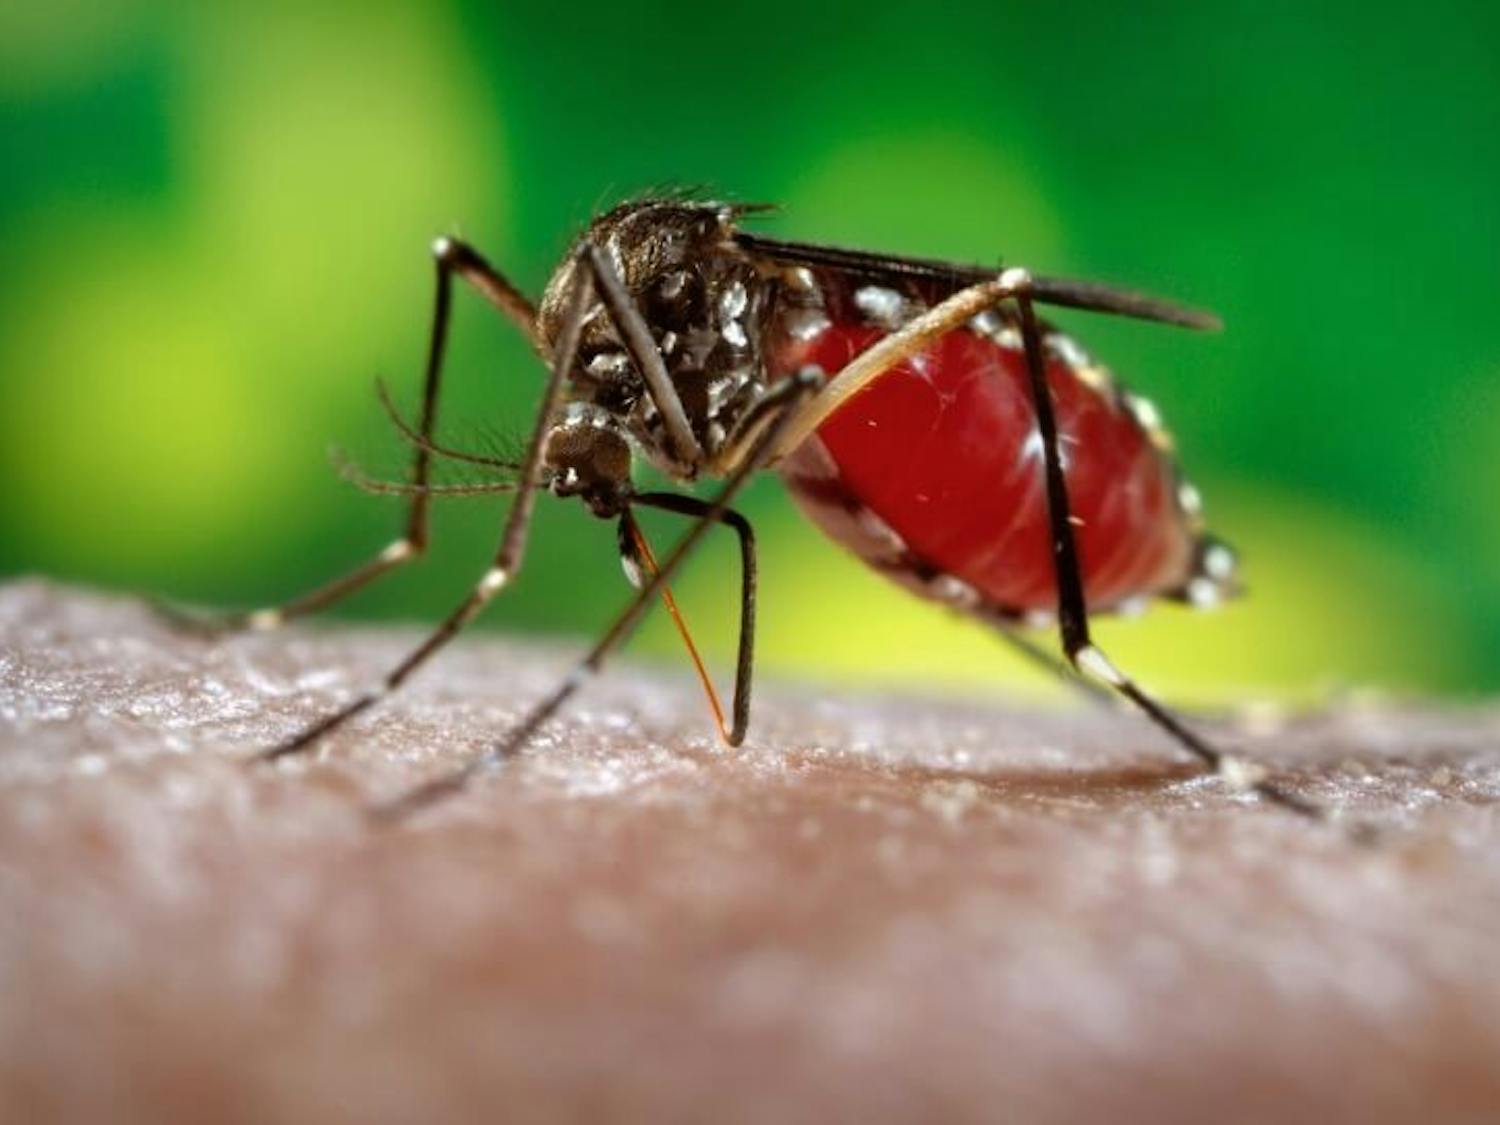 Mosquitoes usually transmit the Zika virus, which has quickly spread worldwide.